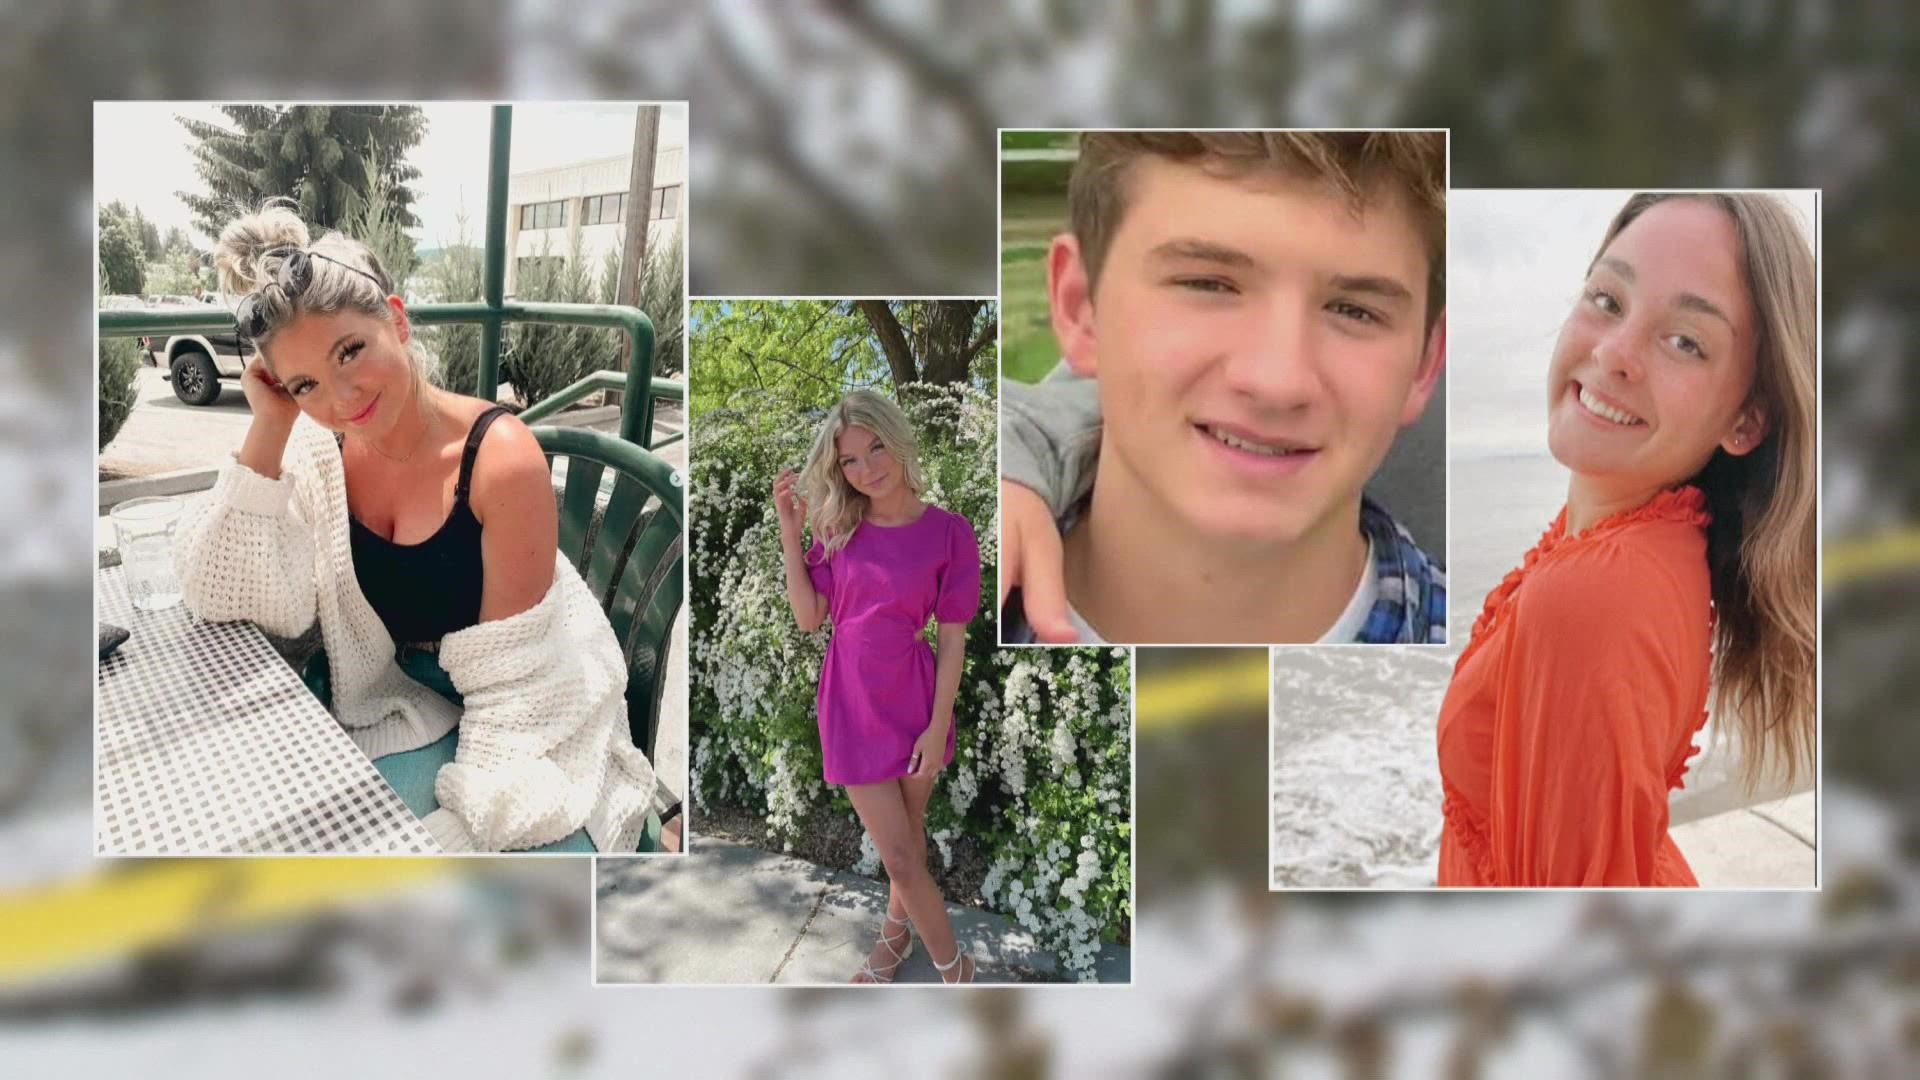 There have still been no arrests in the slayings of four University of Idaho students inside their Moscow, ID home.